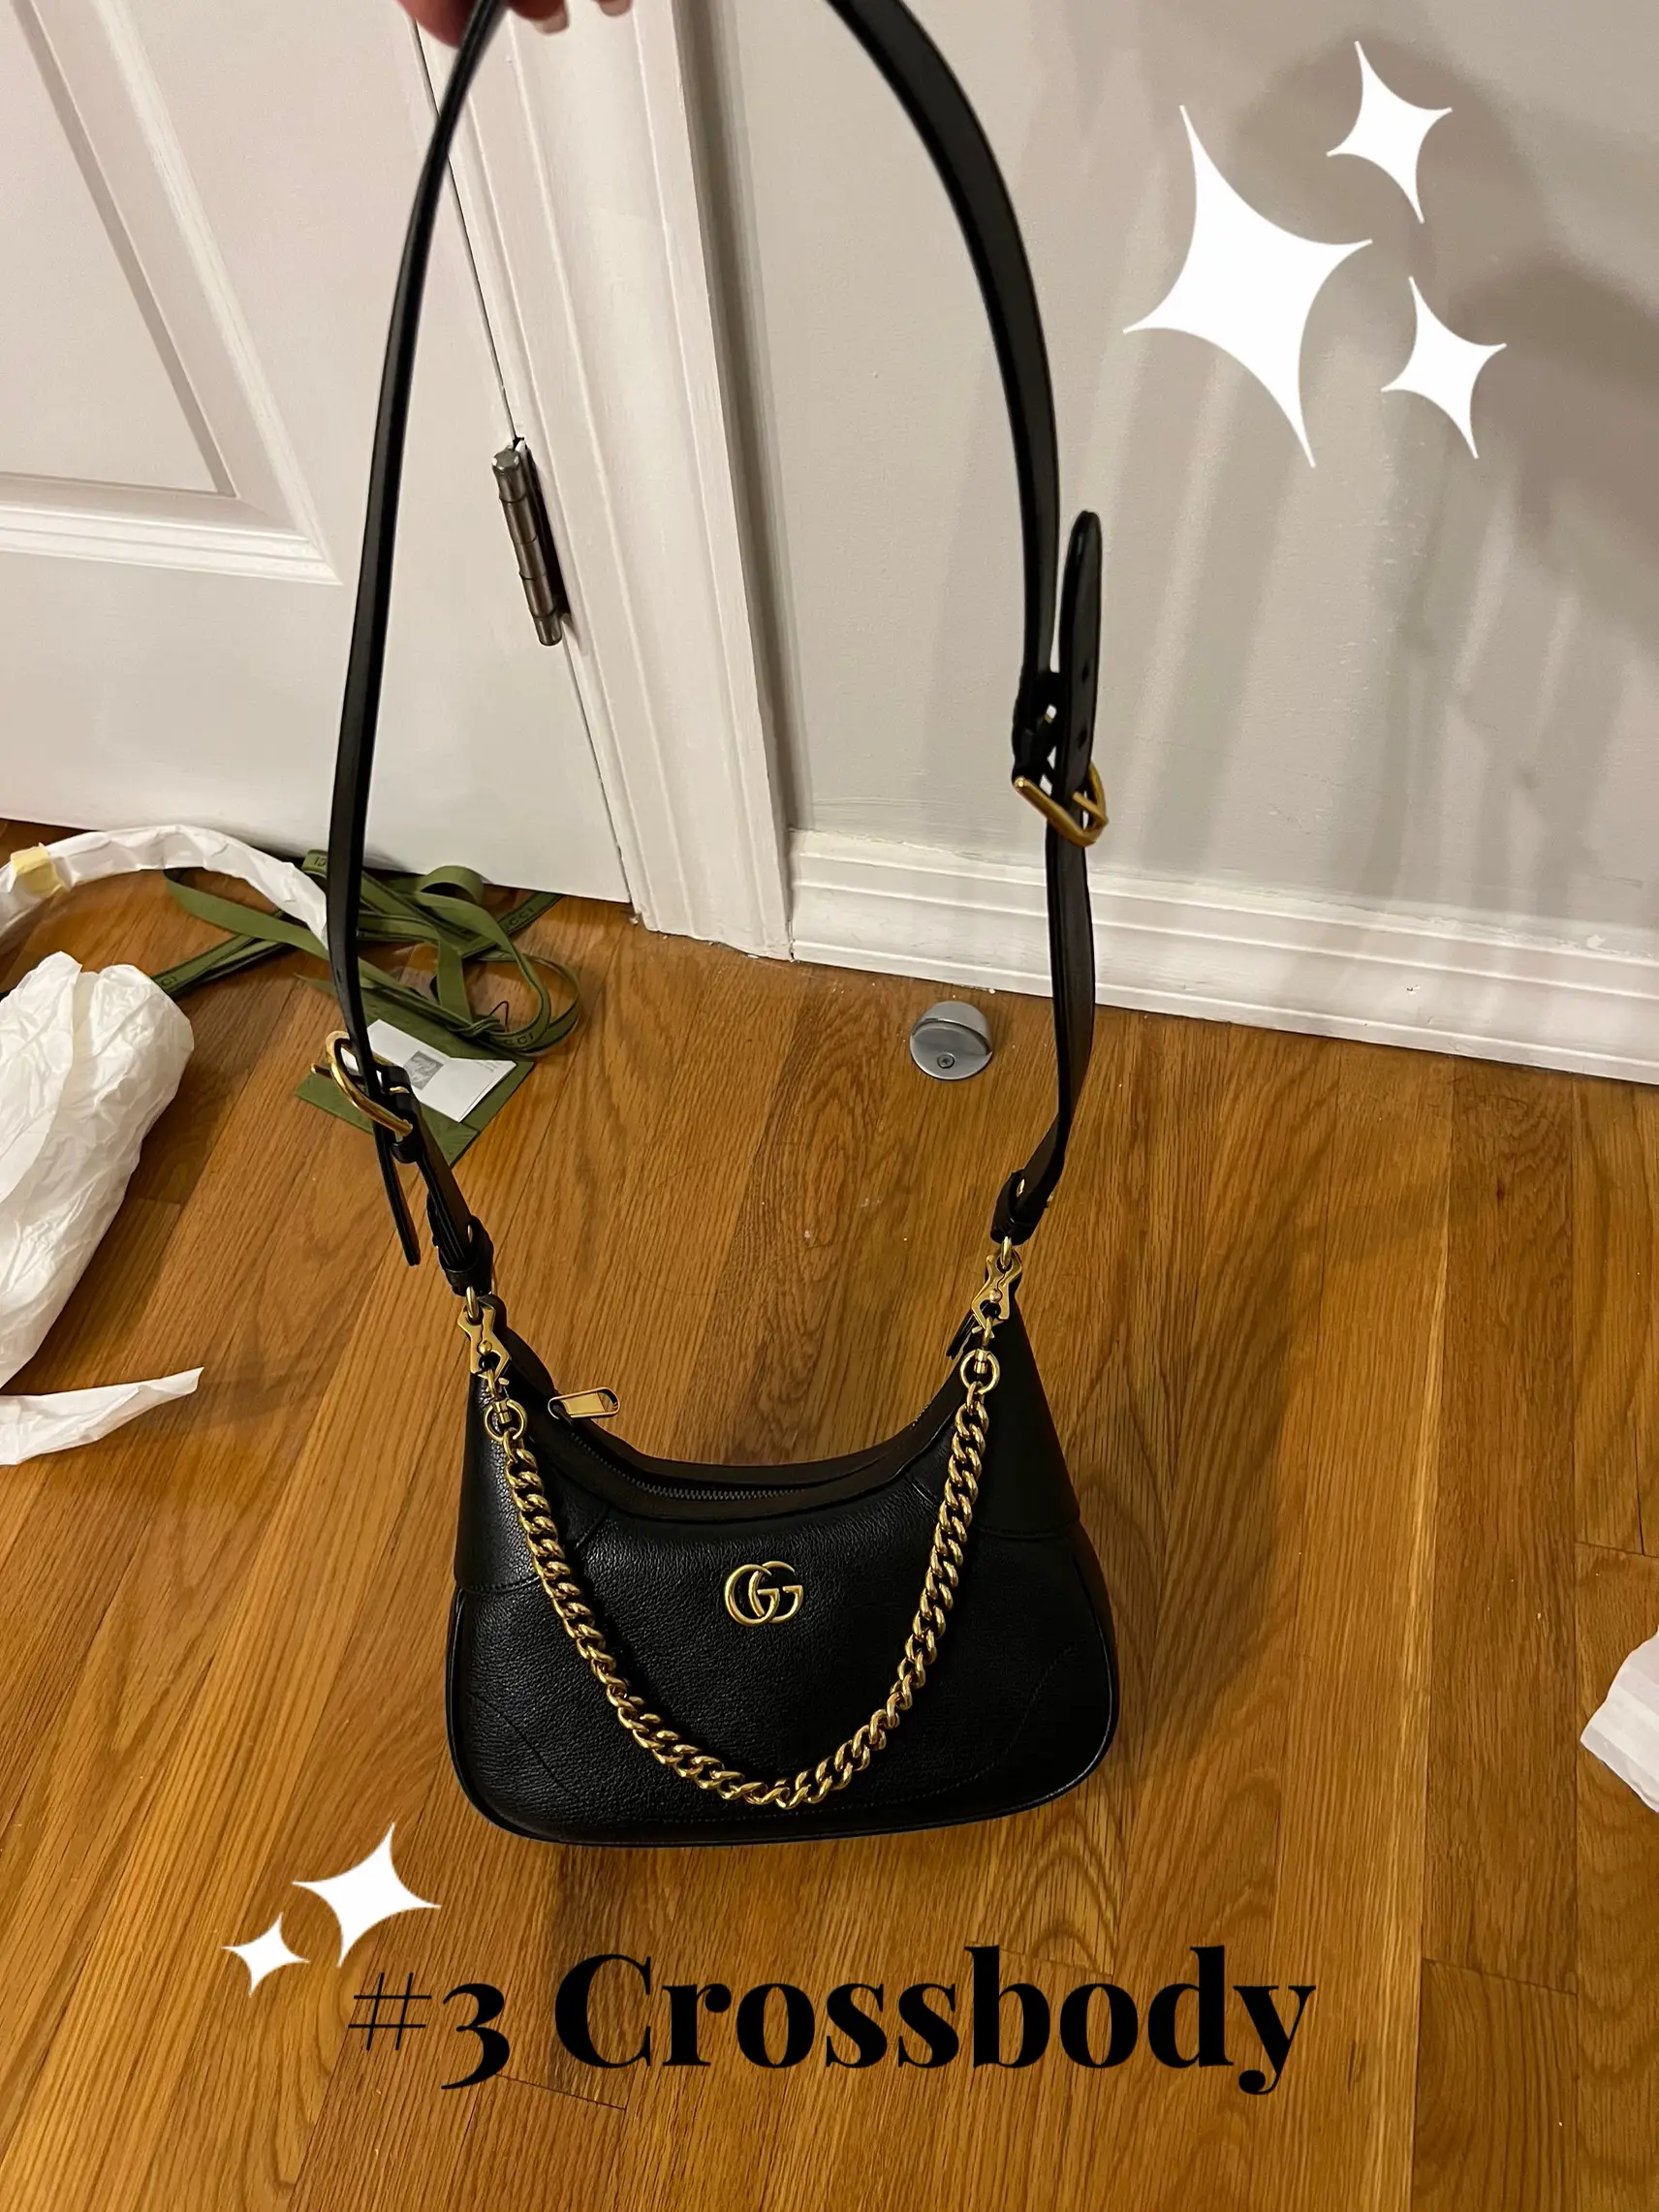 Unboxing my new Gucci Dionysus GG Supreme Wallet on Chain bag! Ordering  from The RealReal 